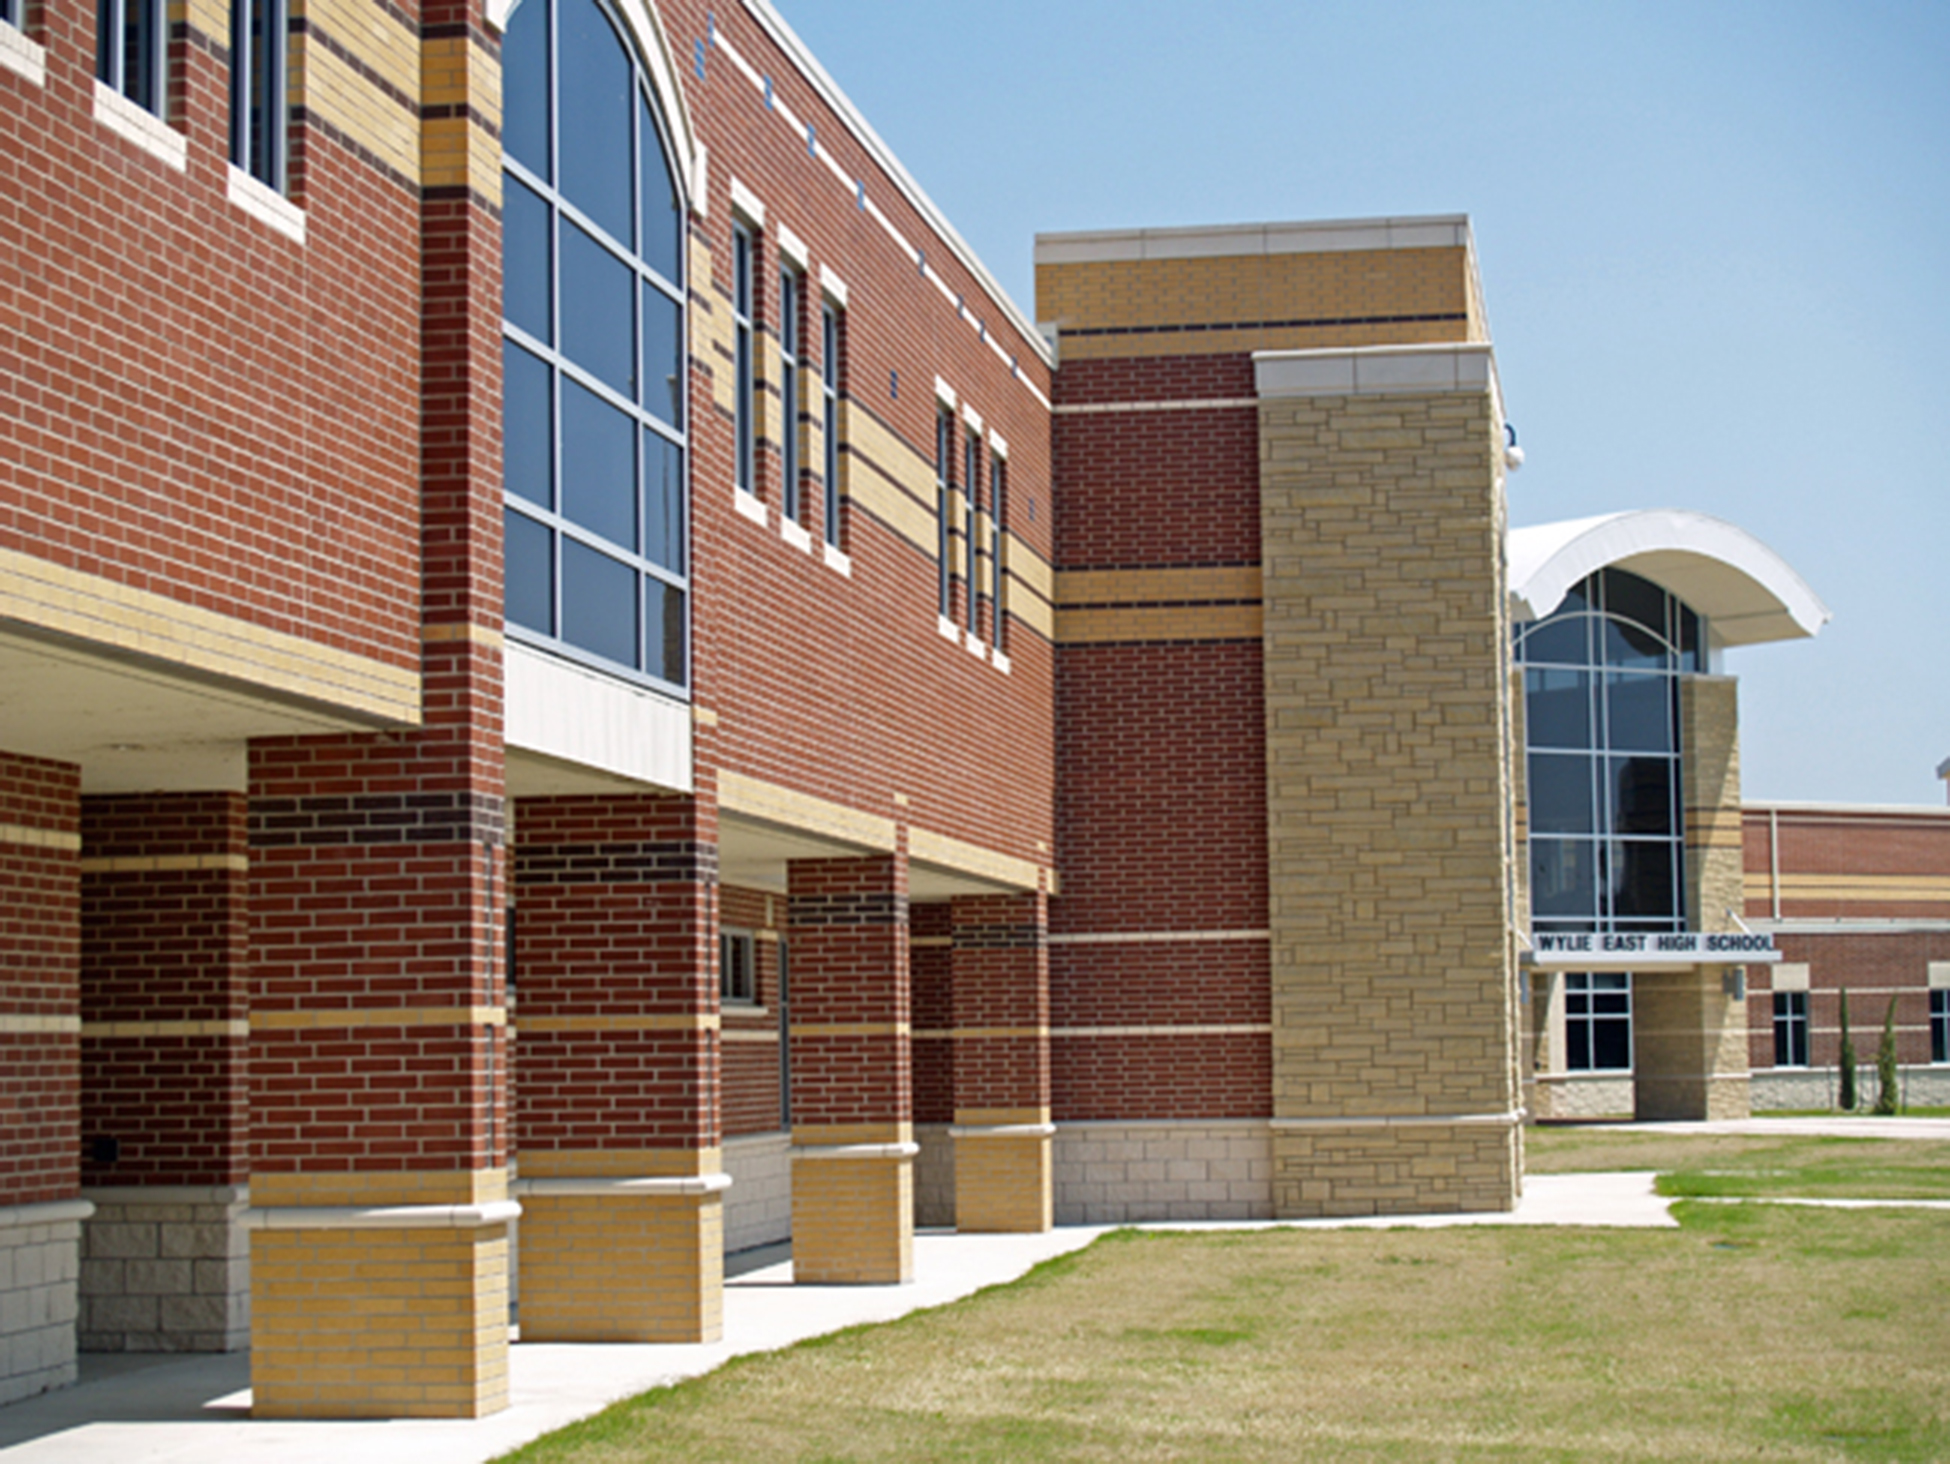 Wylie ISD – Wylie East High School Addition and Renovation